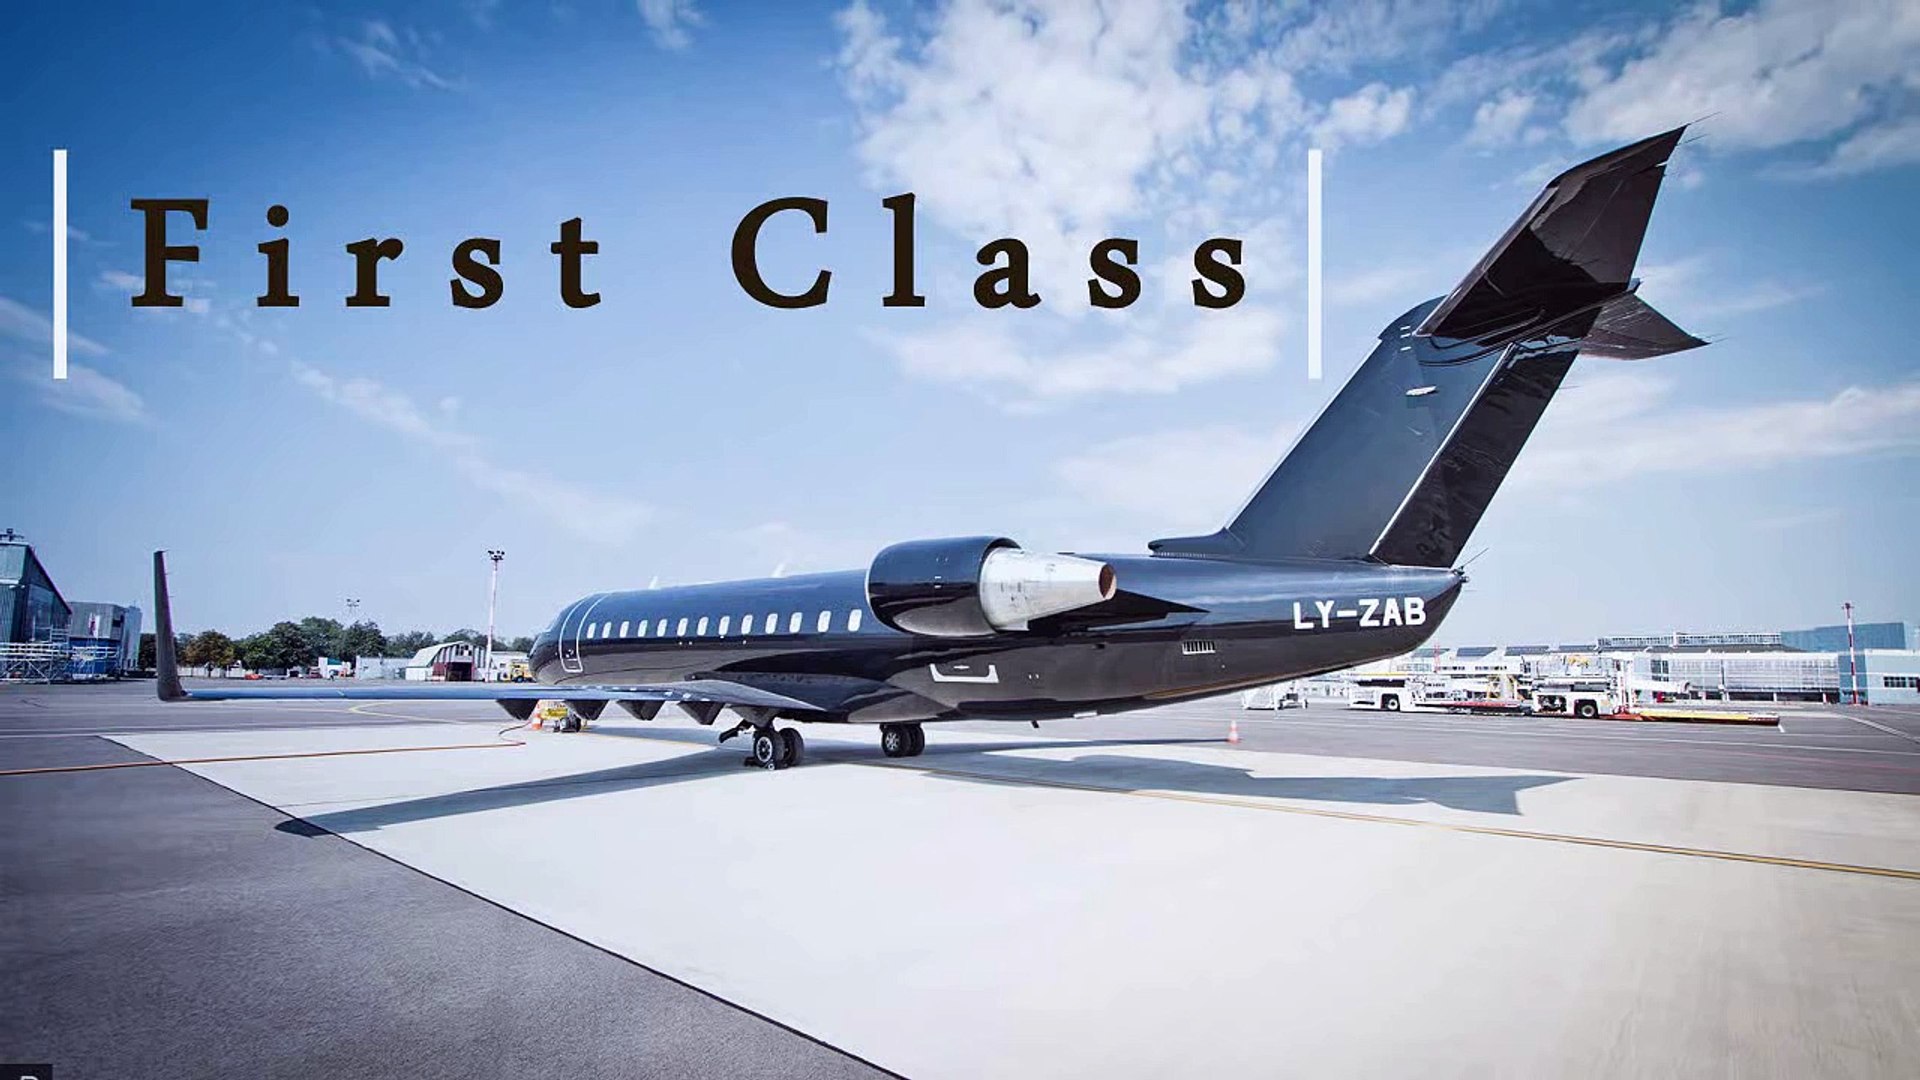 ⁣FREE BEAT: Lil Durk x Chief keef Type Beat First Class (Prod. by Nostalgia Supreme)